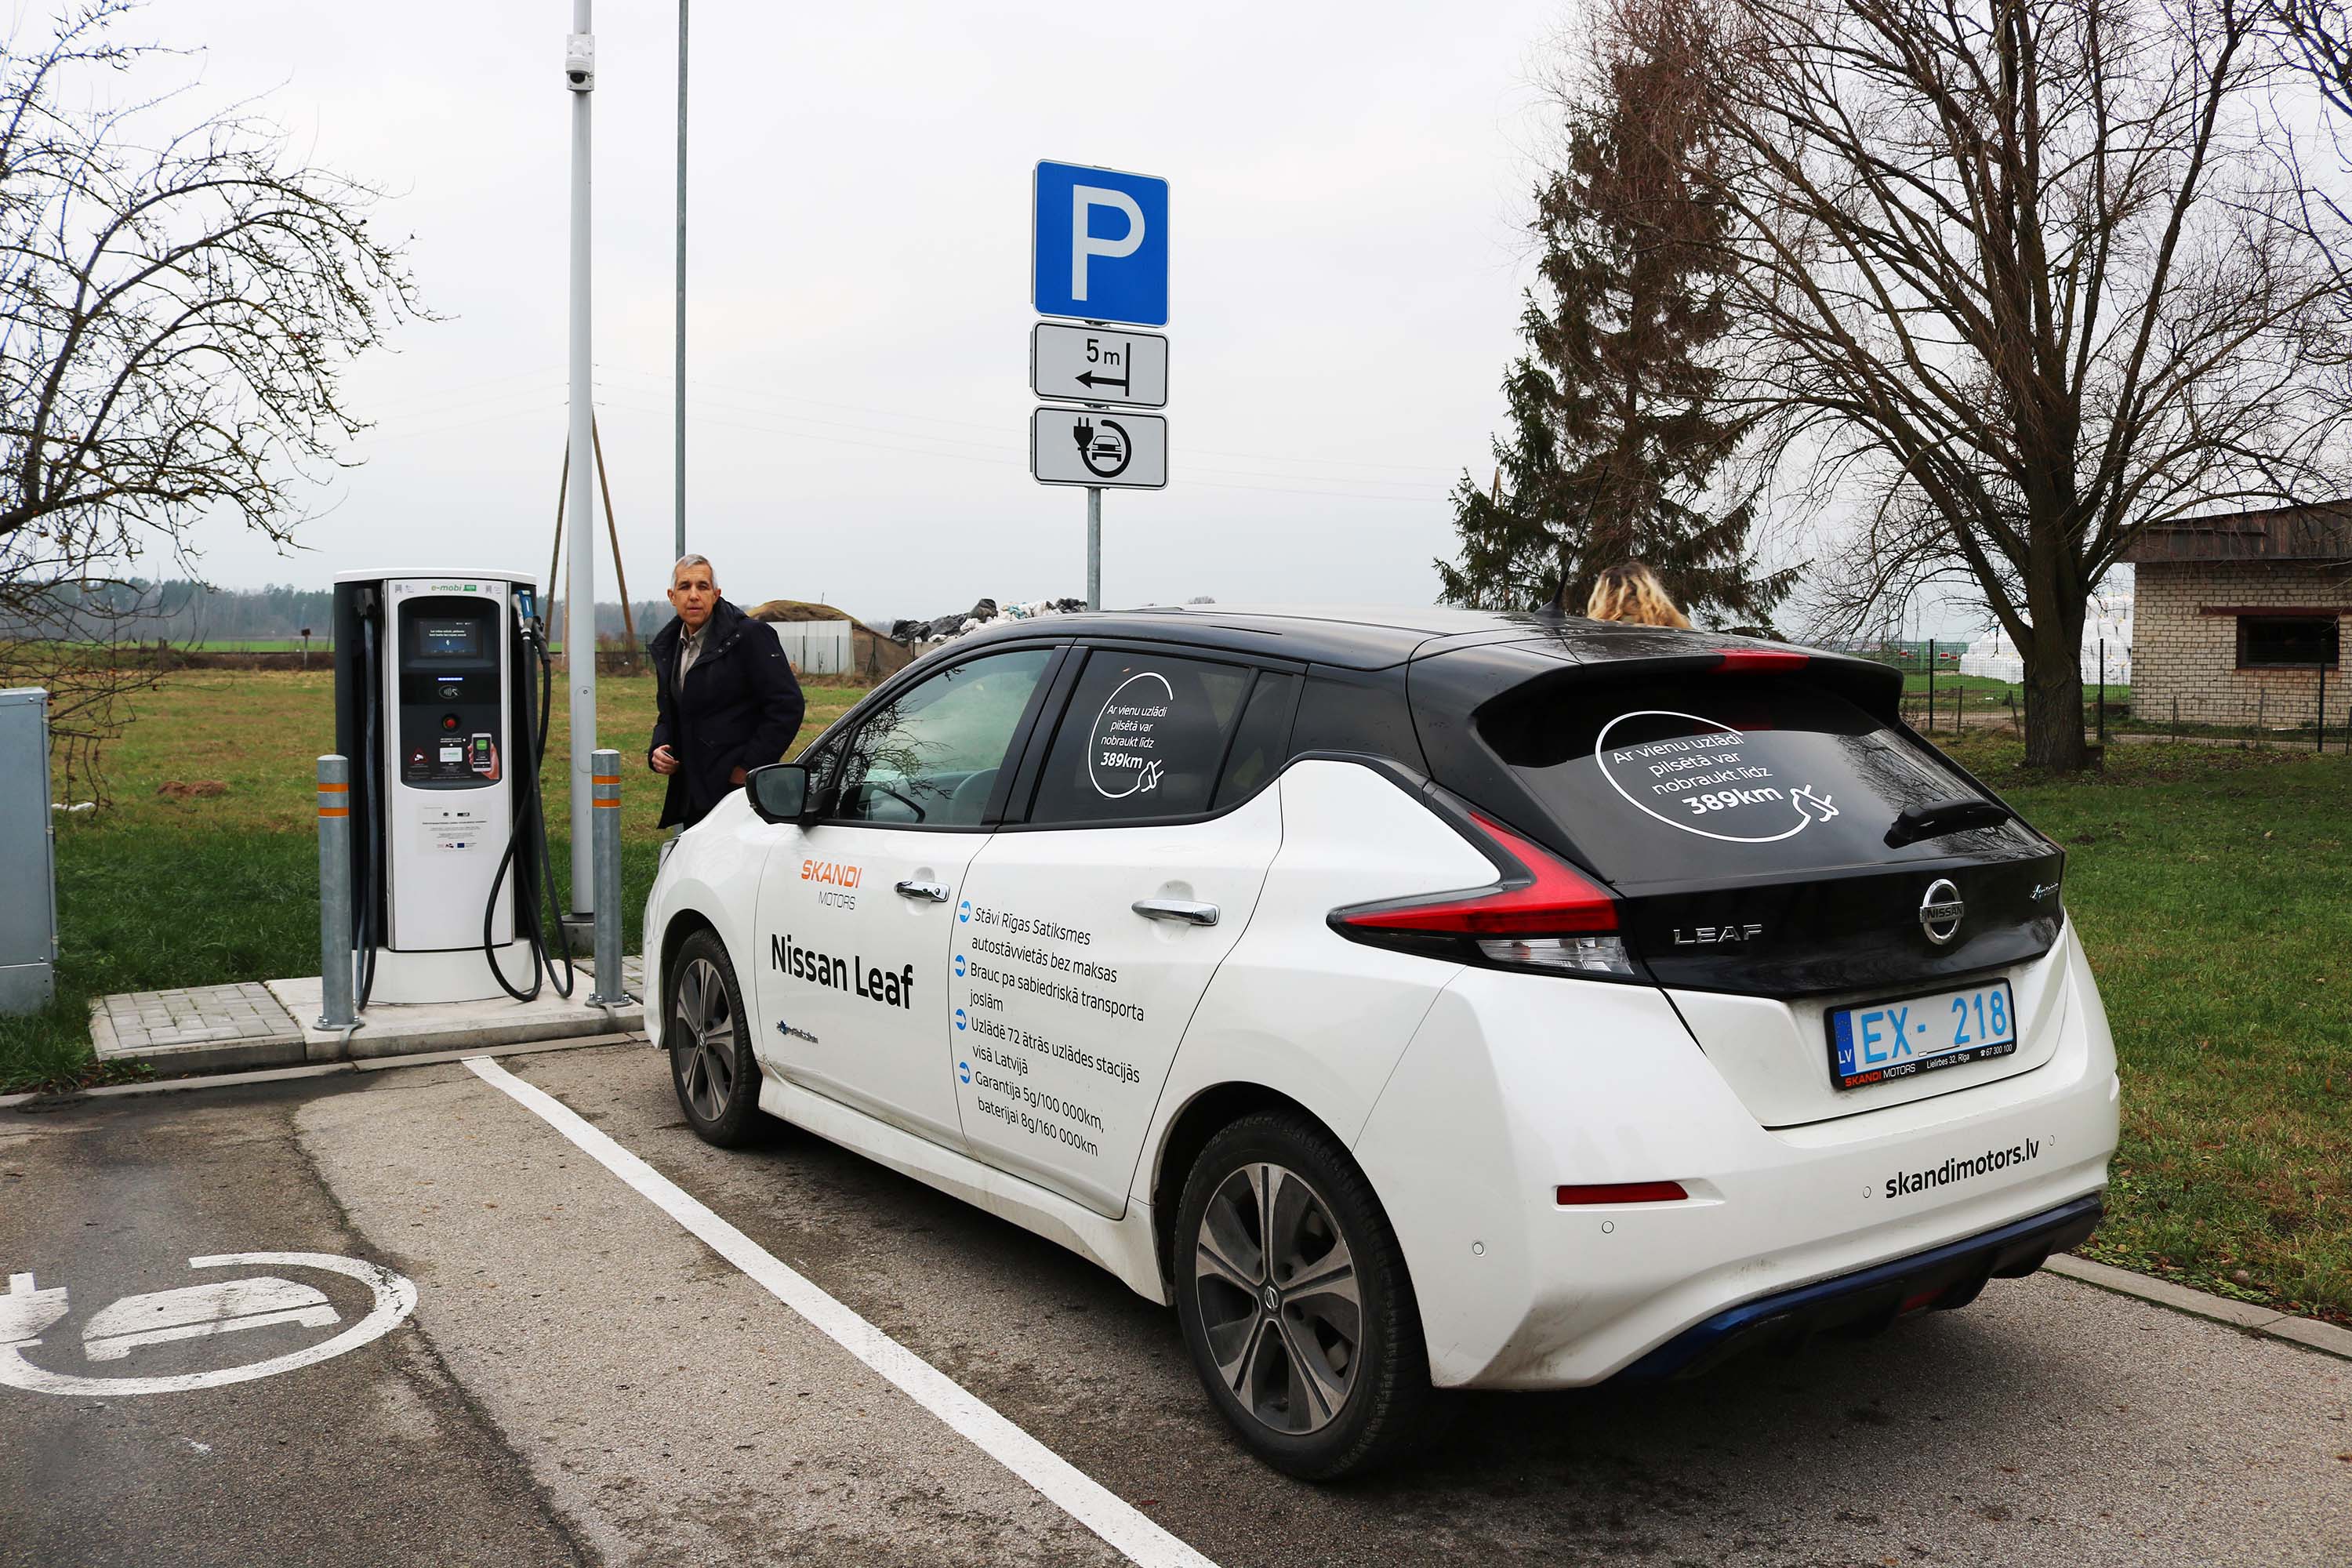 [NEWS] Latvian experts for e-mobility future goals